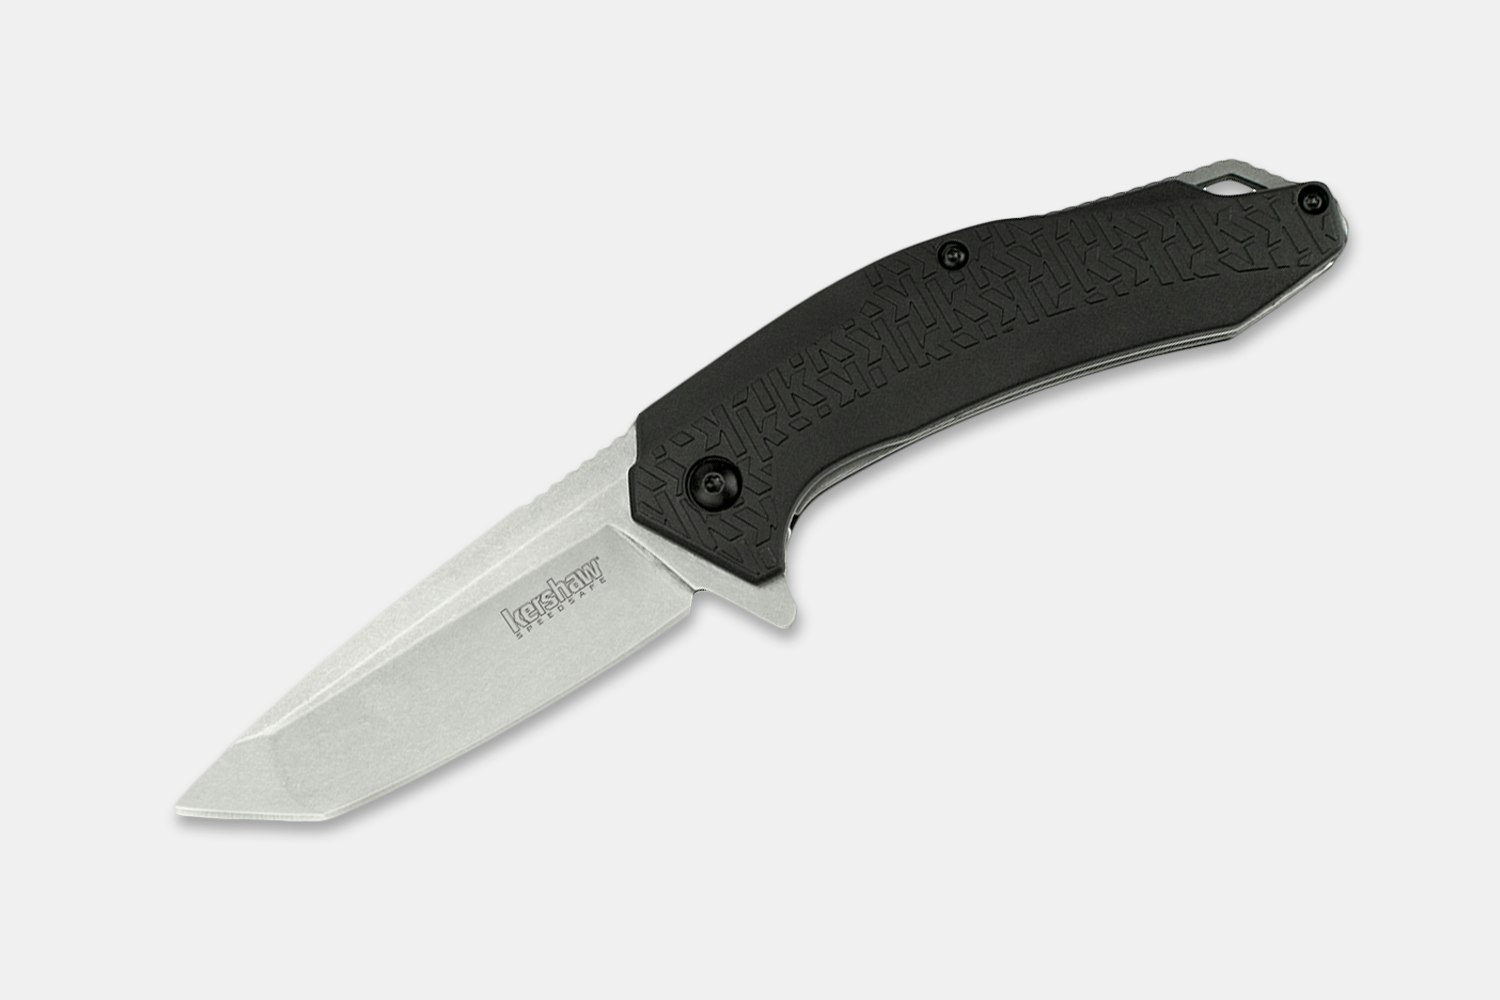 kershaw freefall review